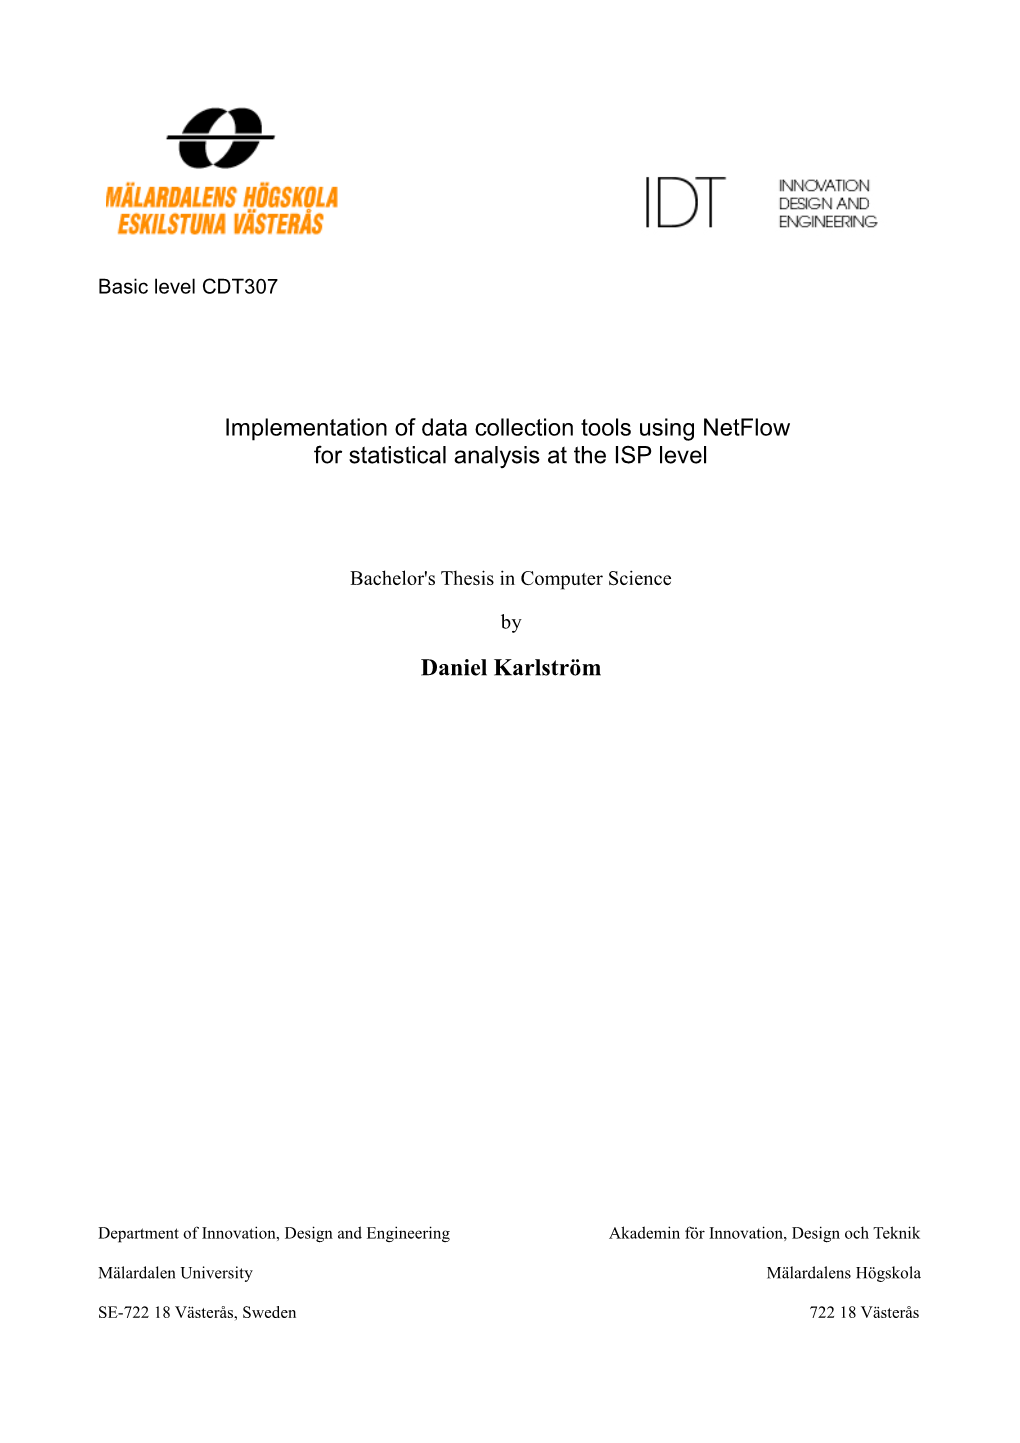 Implementation of Data Collection Tools Using Netflow for Statistical Analysis at the ISP Level Daniel Karlström